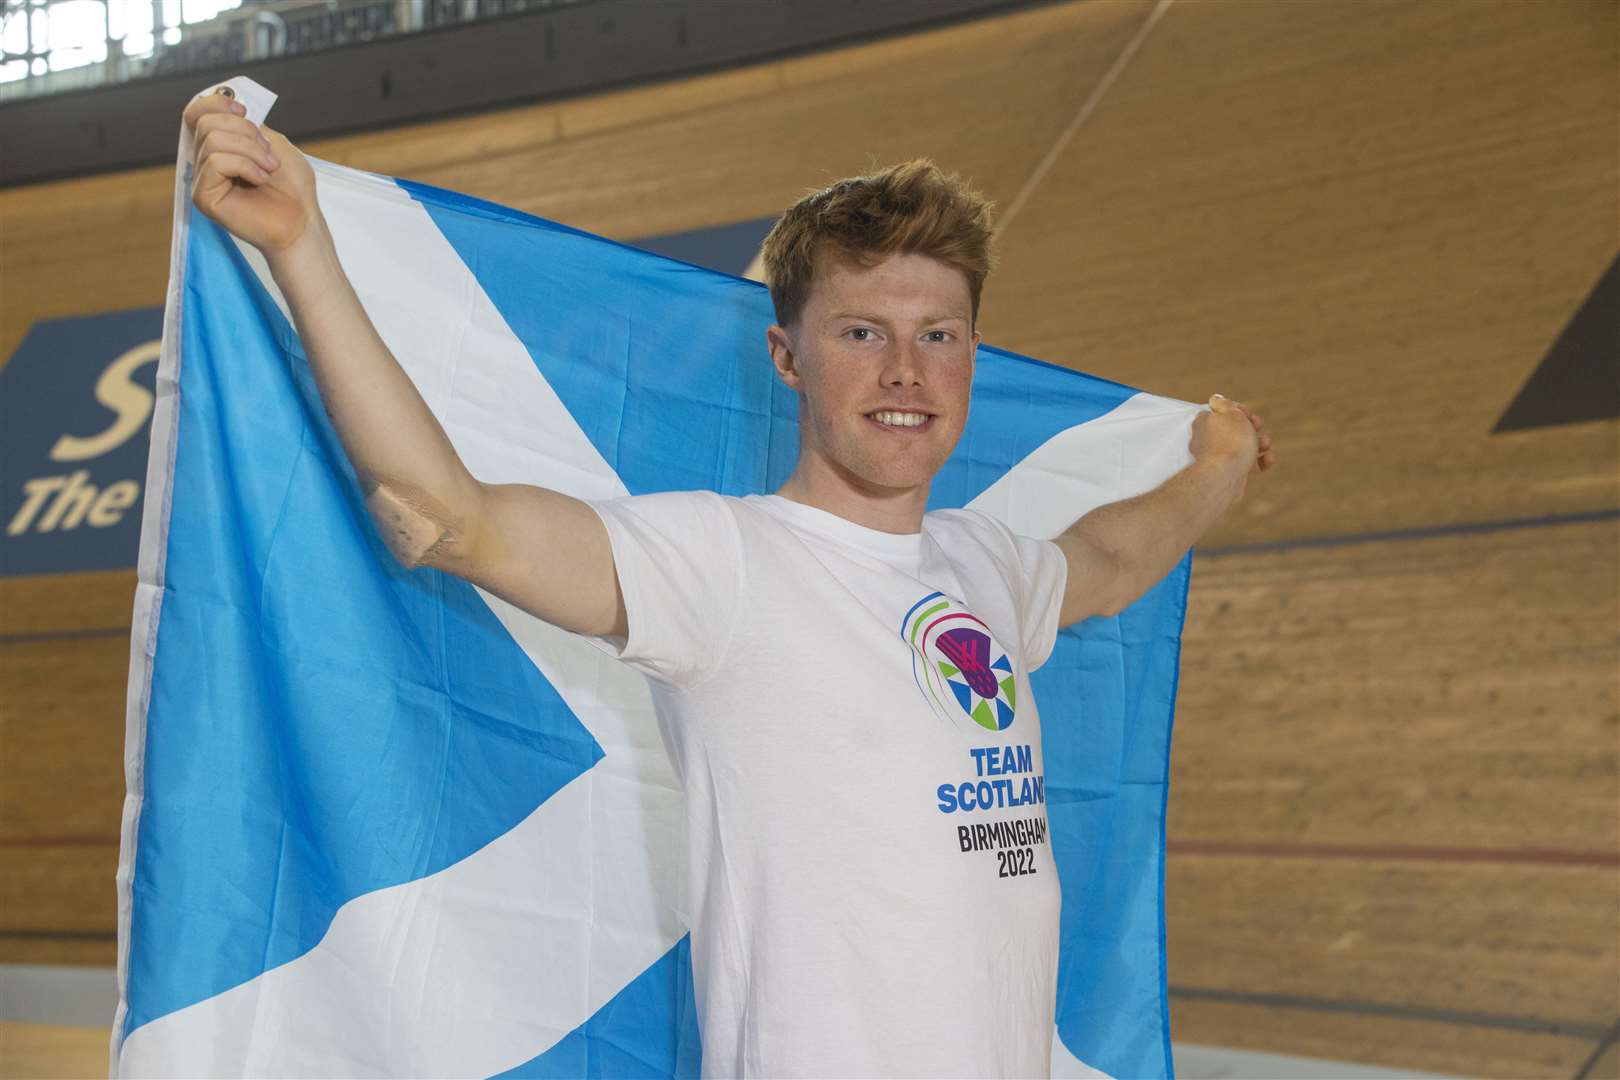 Finn Crockett made his Commonwealth Games debut for Team Scotland earlier today.